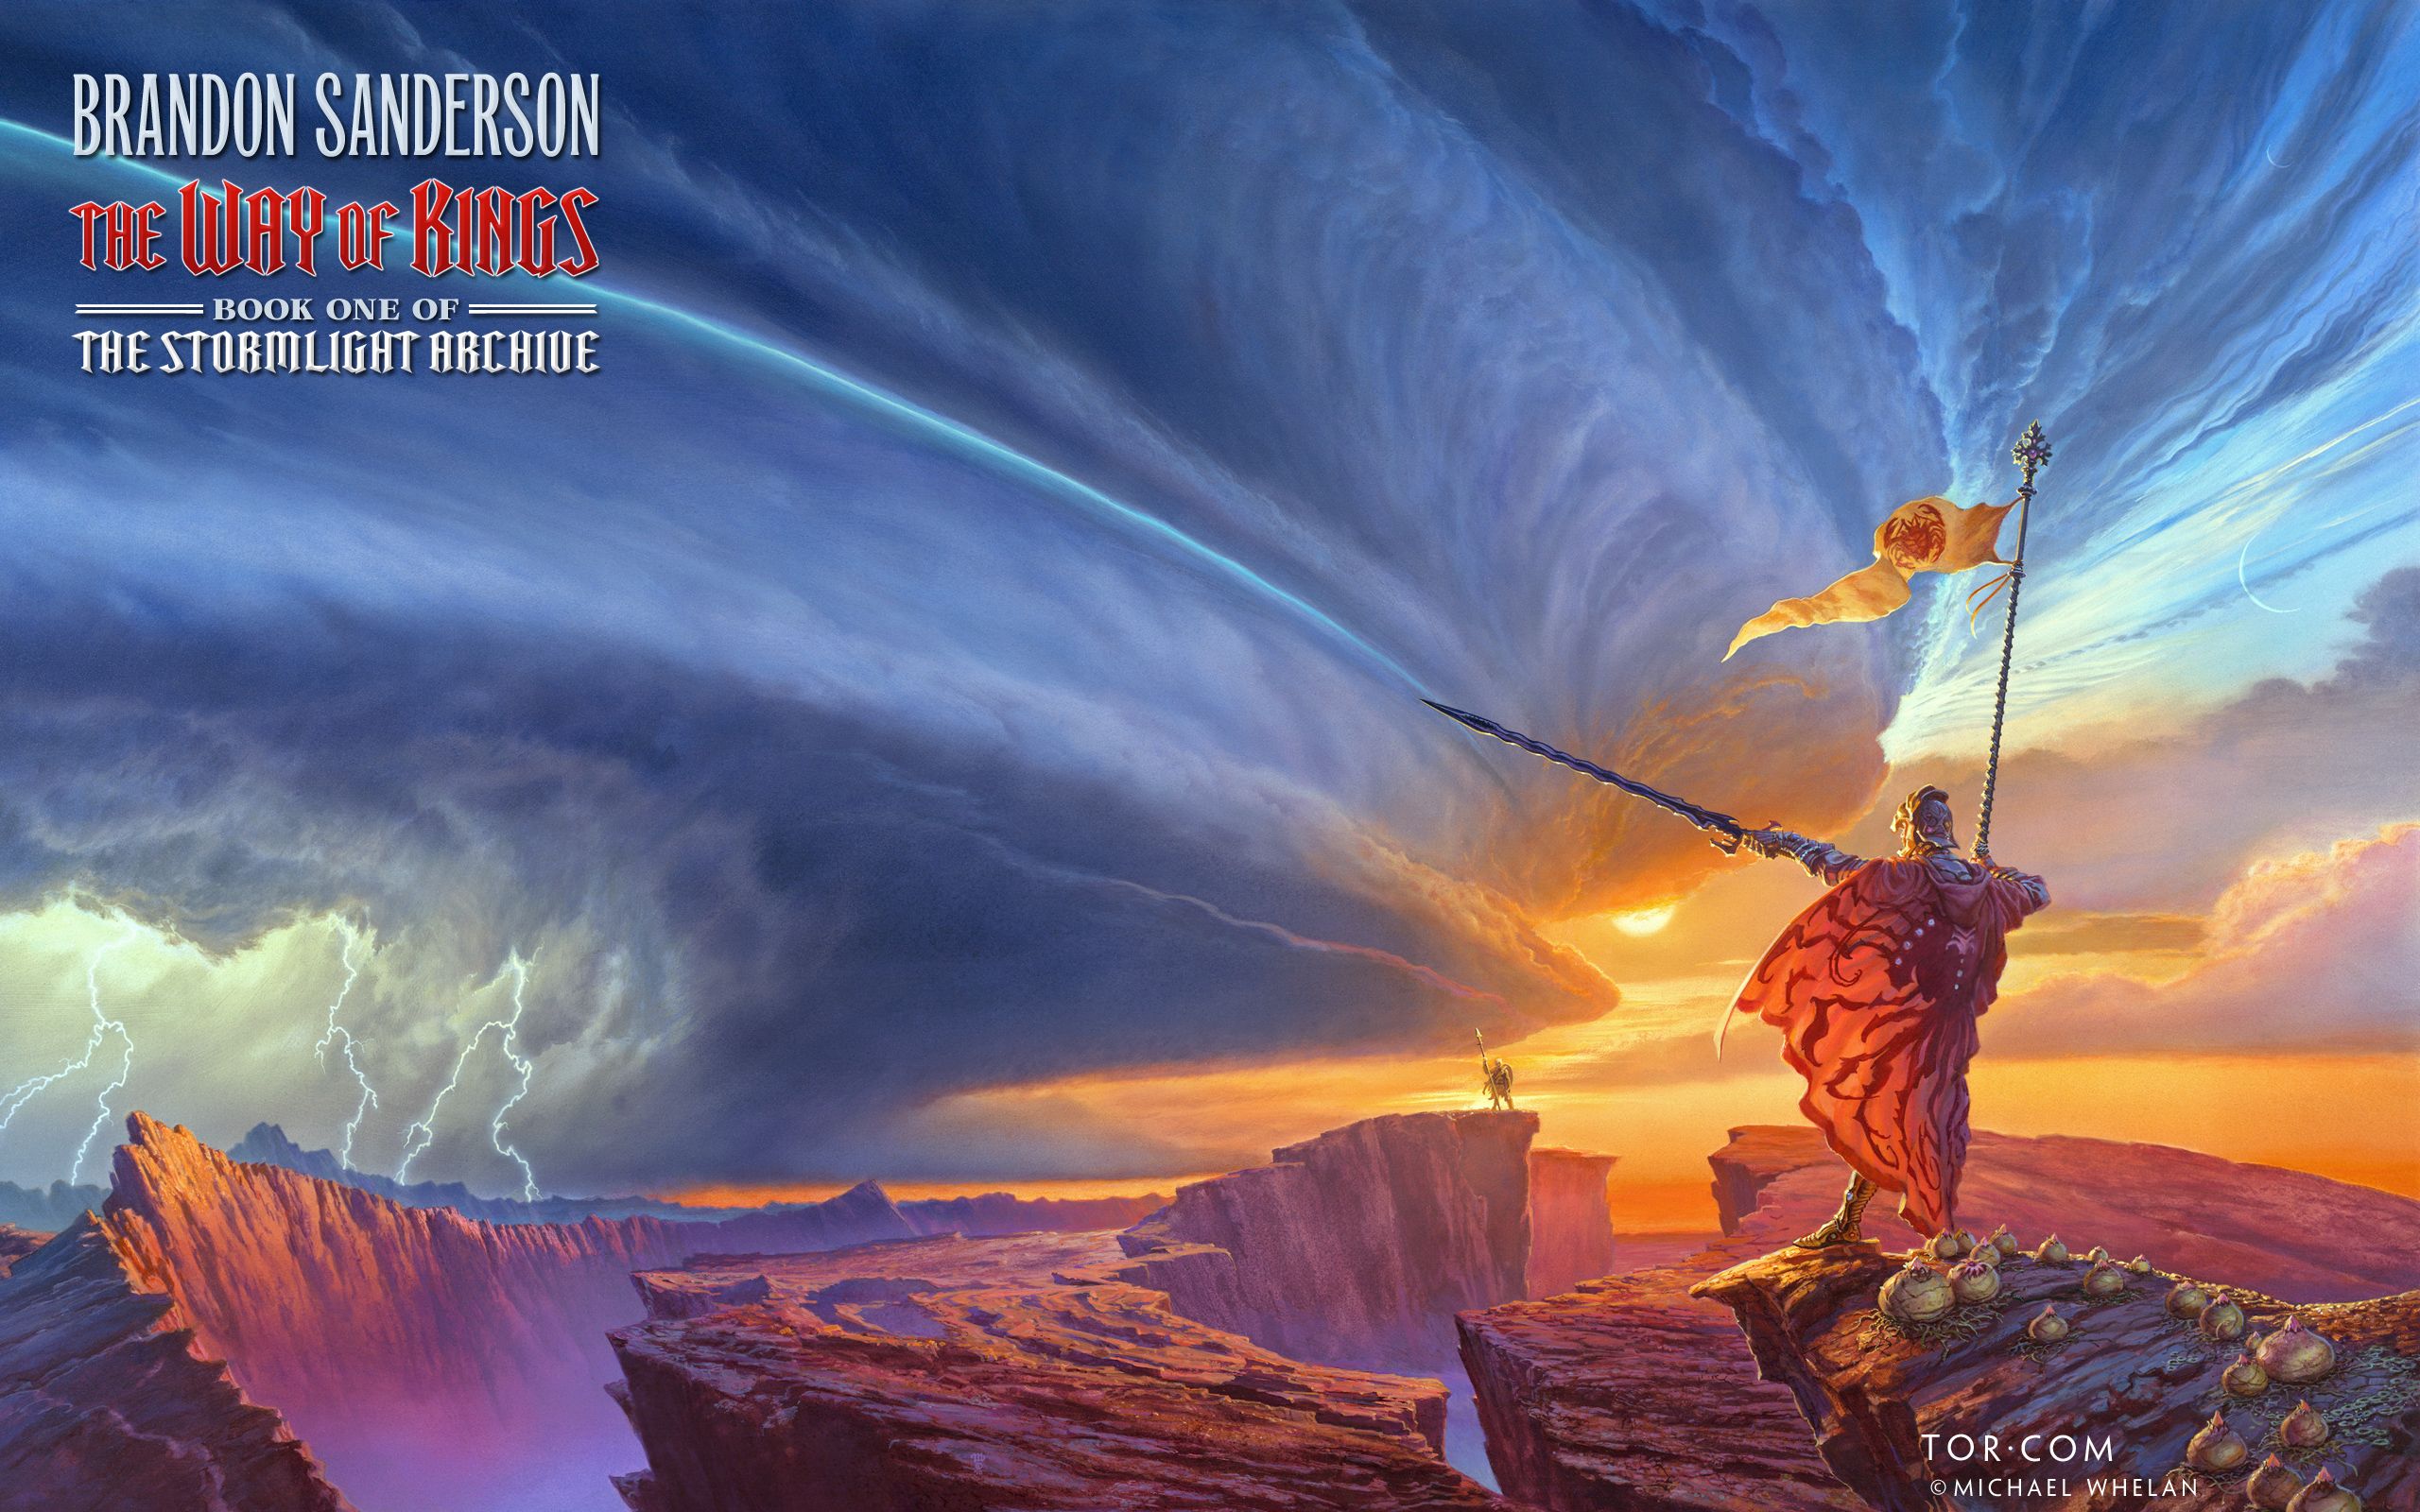 Download Wallpaper for Brandon Sanderson's The Way of Kings, Illustrated by Artist Michael Whelan